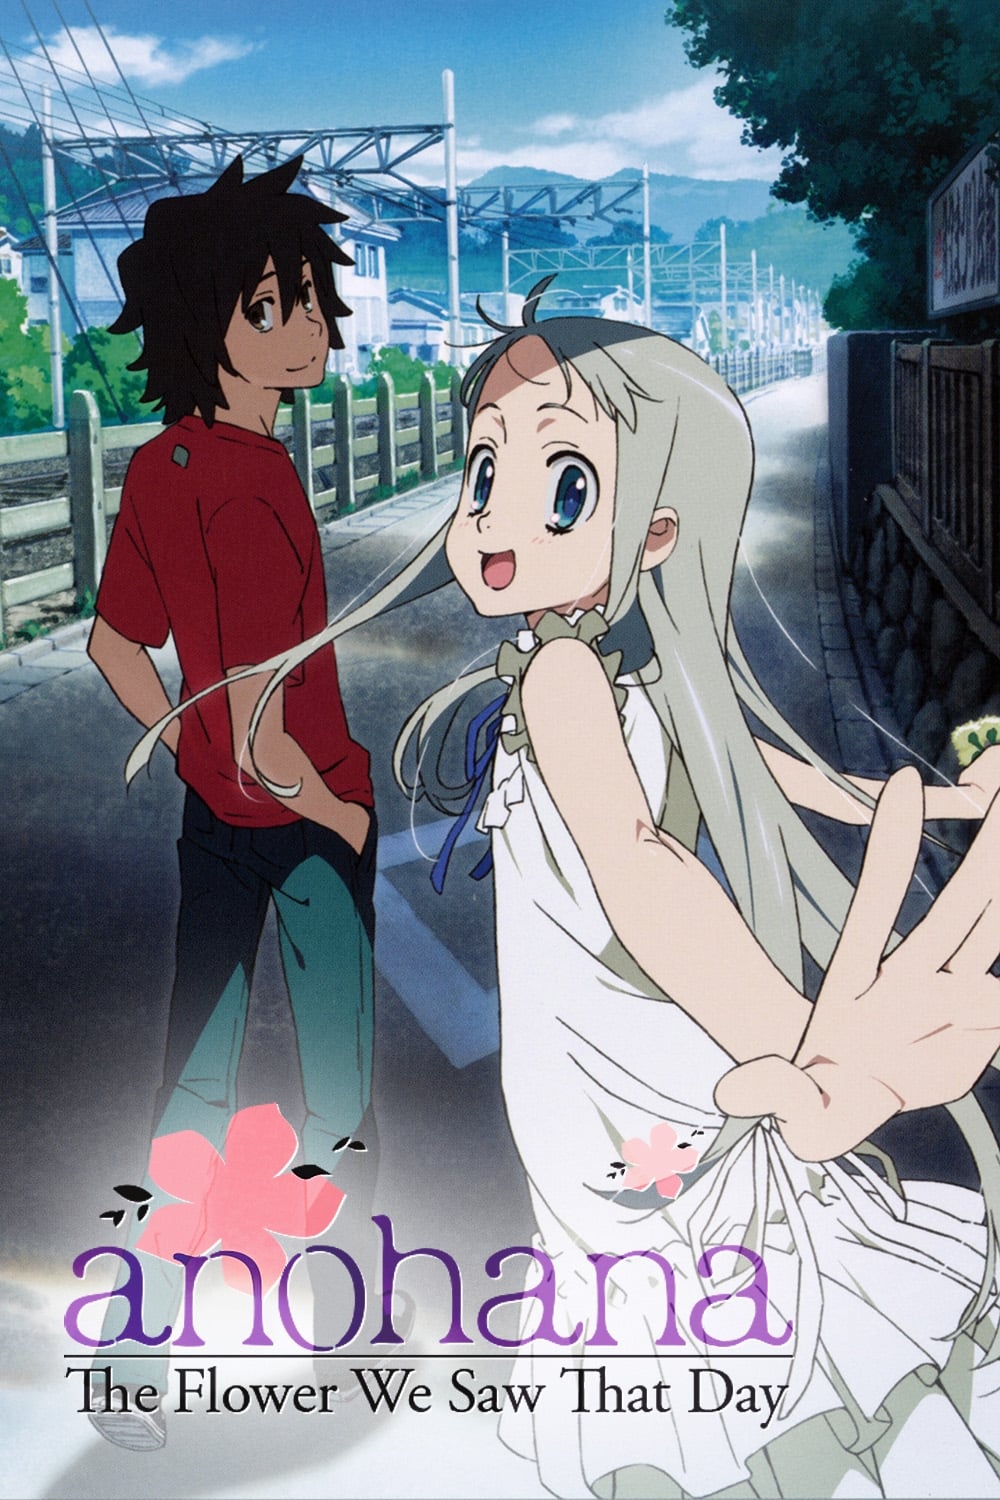 anohana: The Flower We Saw That Day (2011)